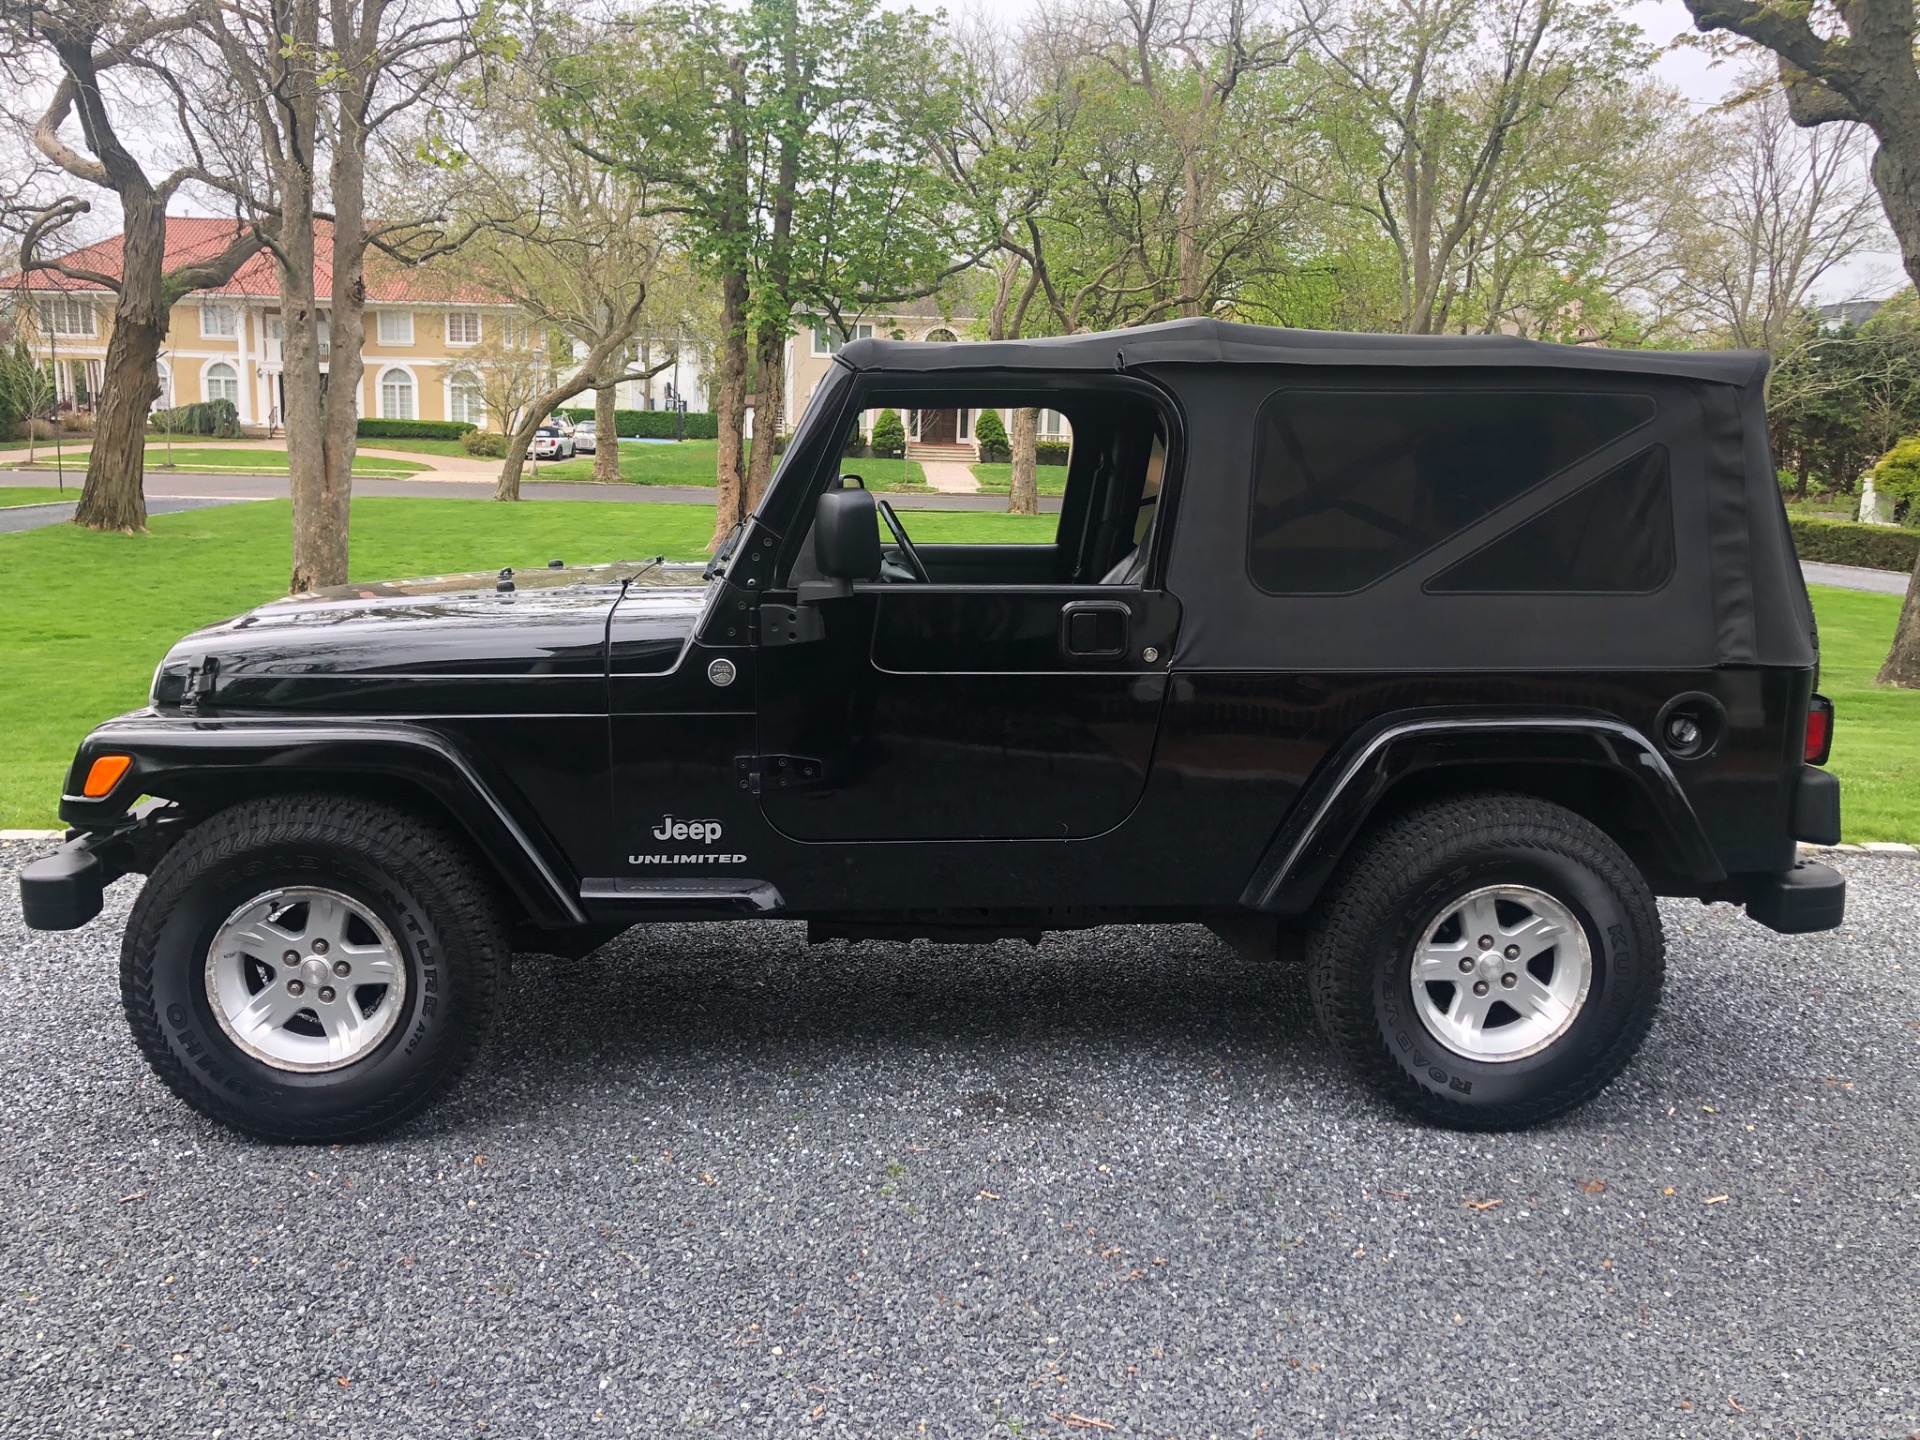 Used 2006 Jeep Wrangler Unlimited LJ Unlimited For Sale ($12,900) | Legend  Leasing Stock #9146